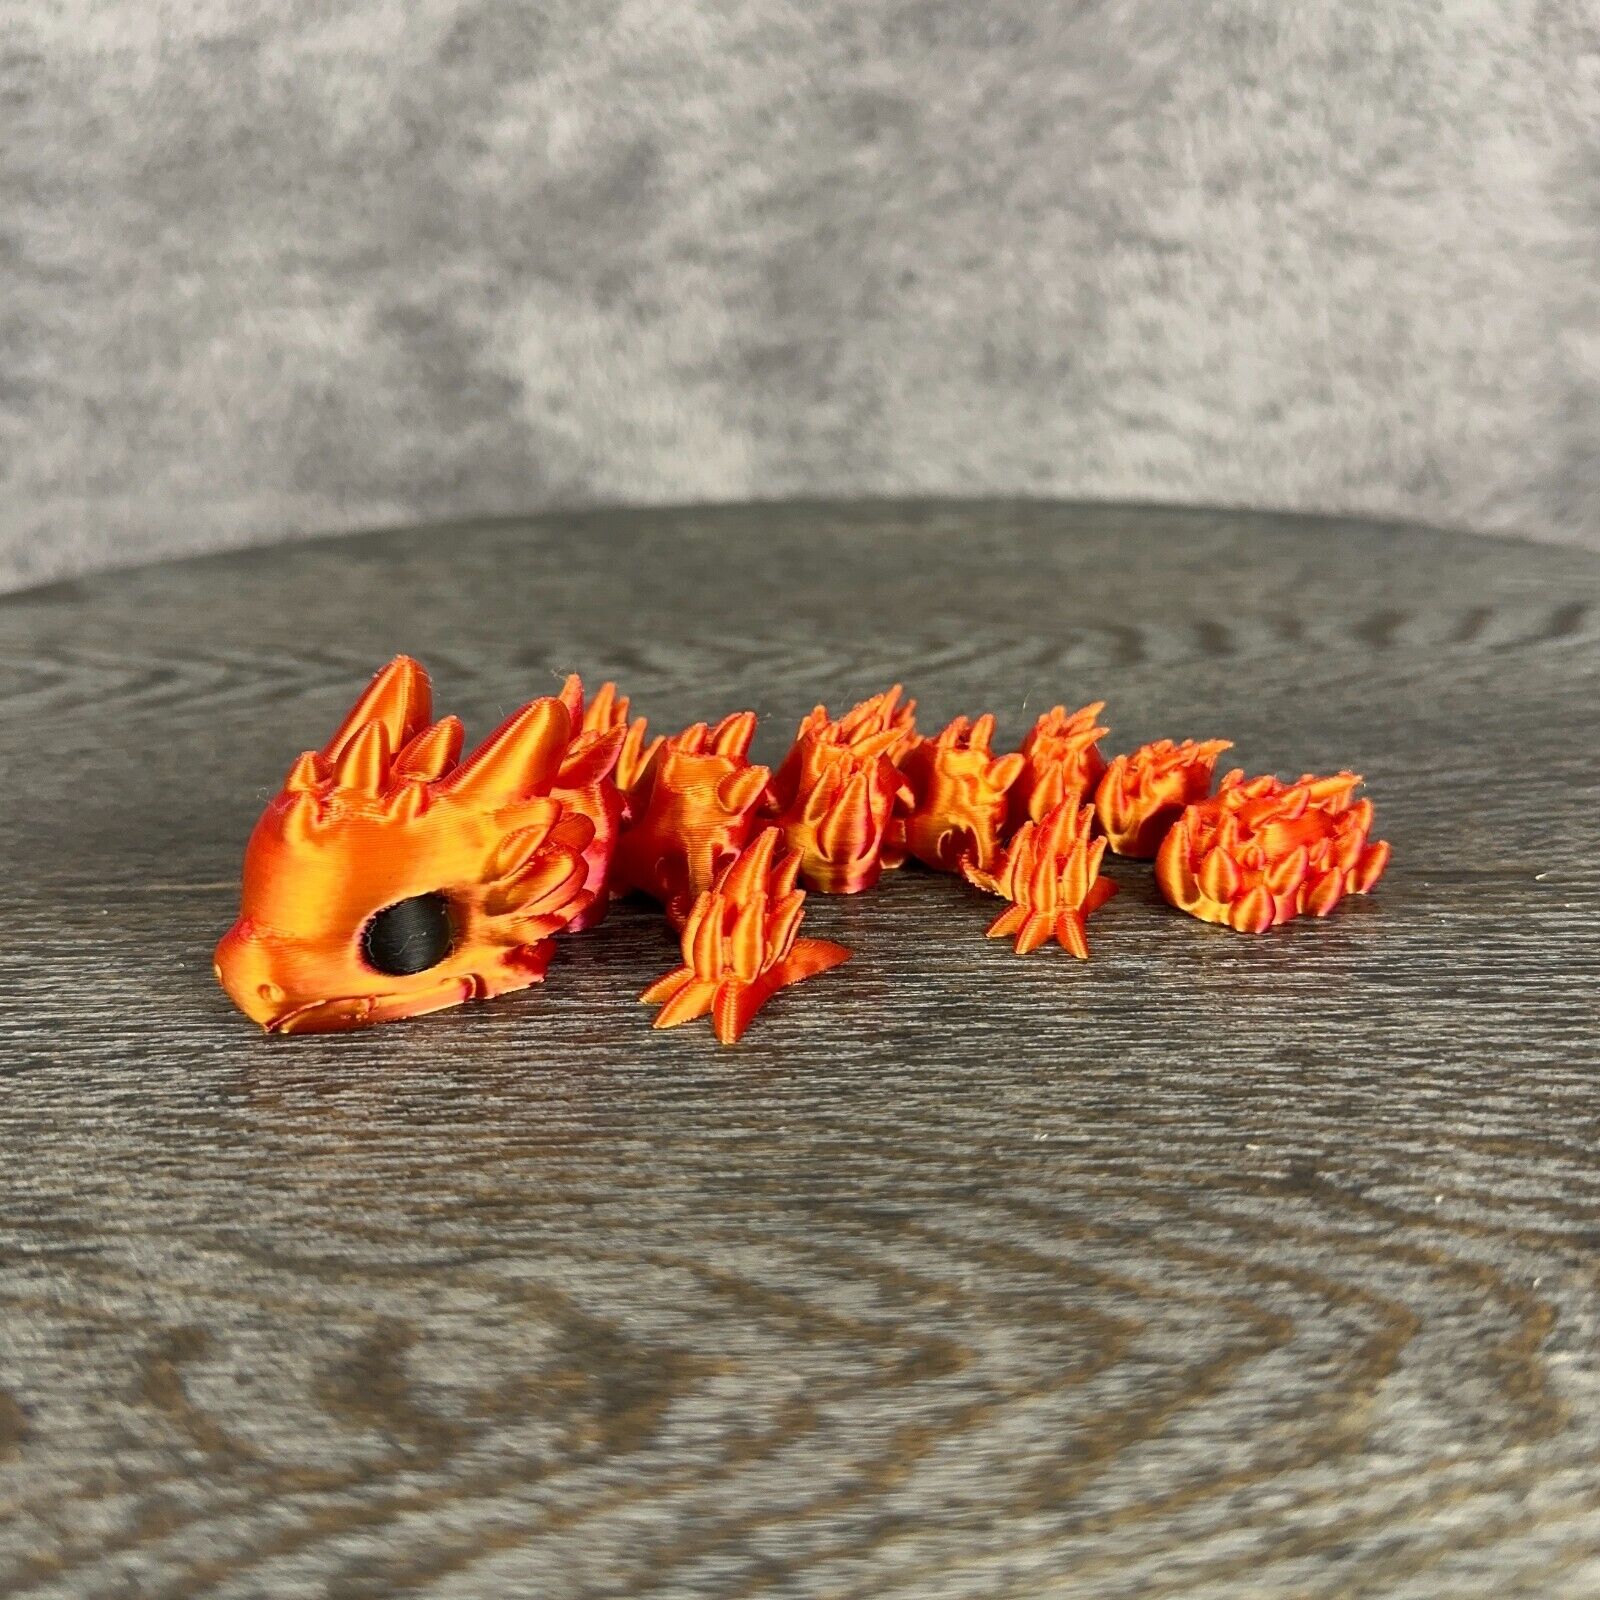 3D Printed Dragon Articulated 3D dragon model Tiny Cute Orange And Red Silk